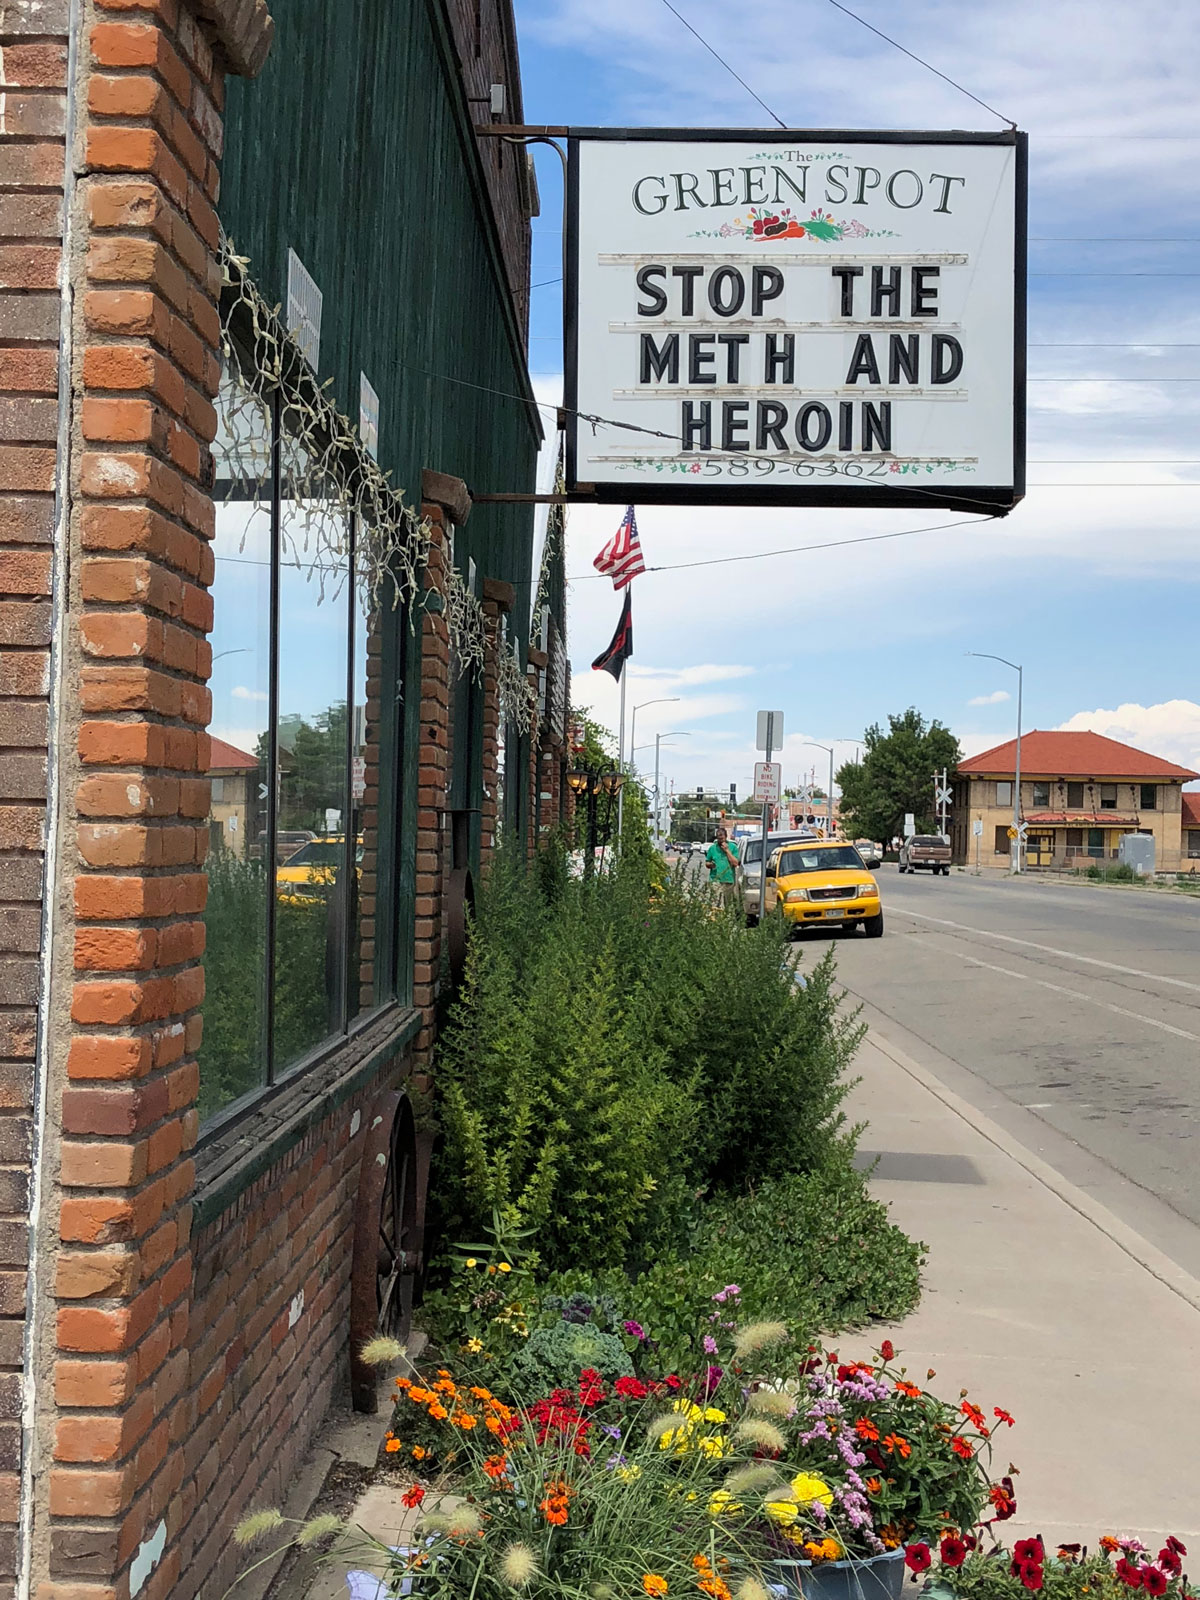 sign in town that says "stop the meth and heroin"